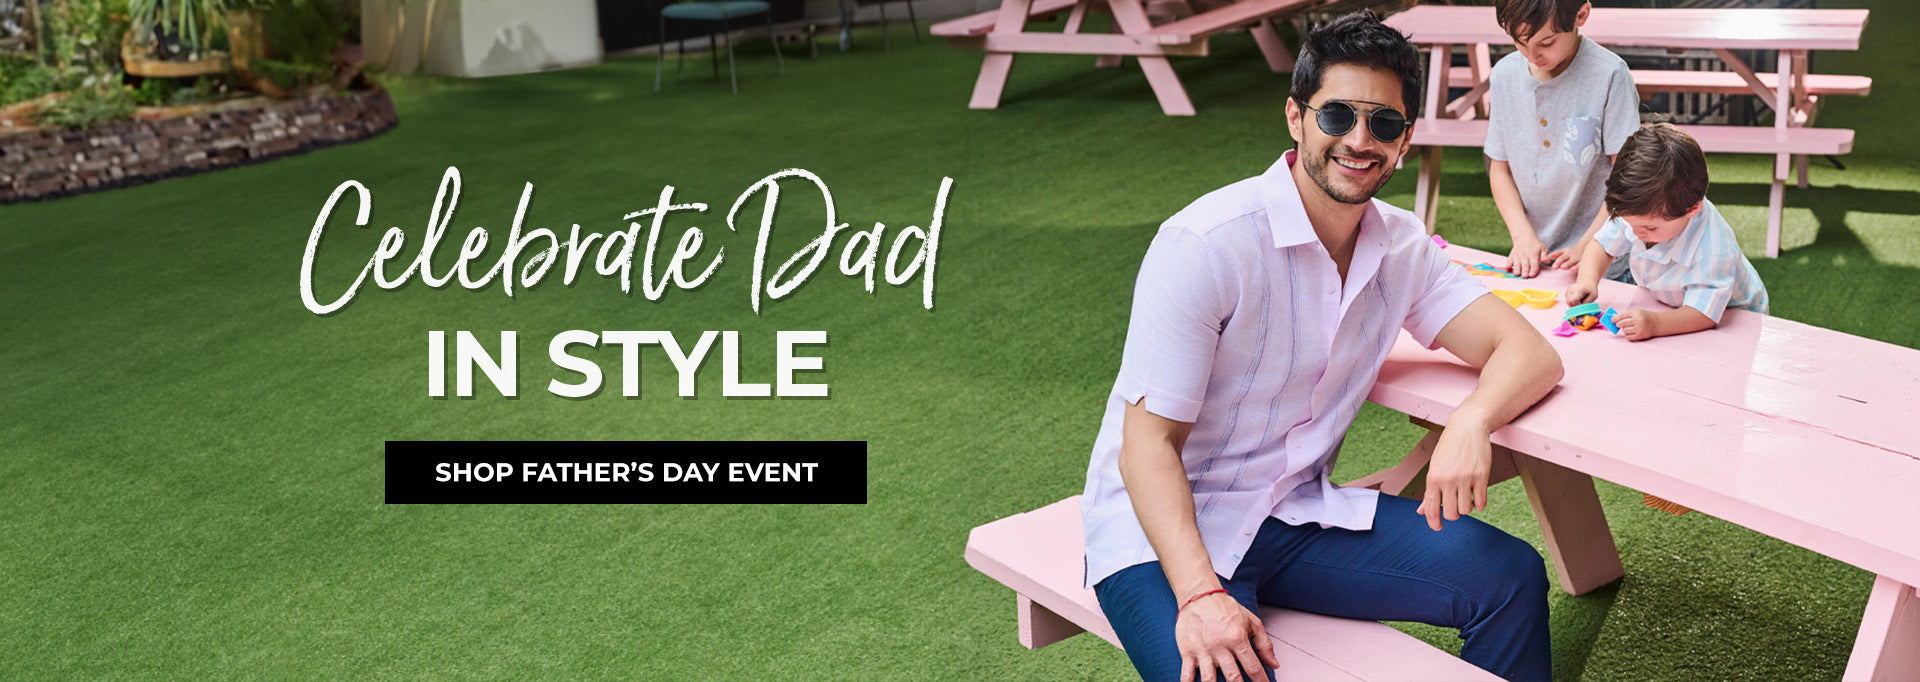 SHOP FATHER’S DAY EVENT